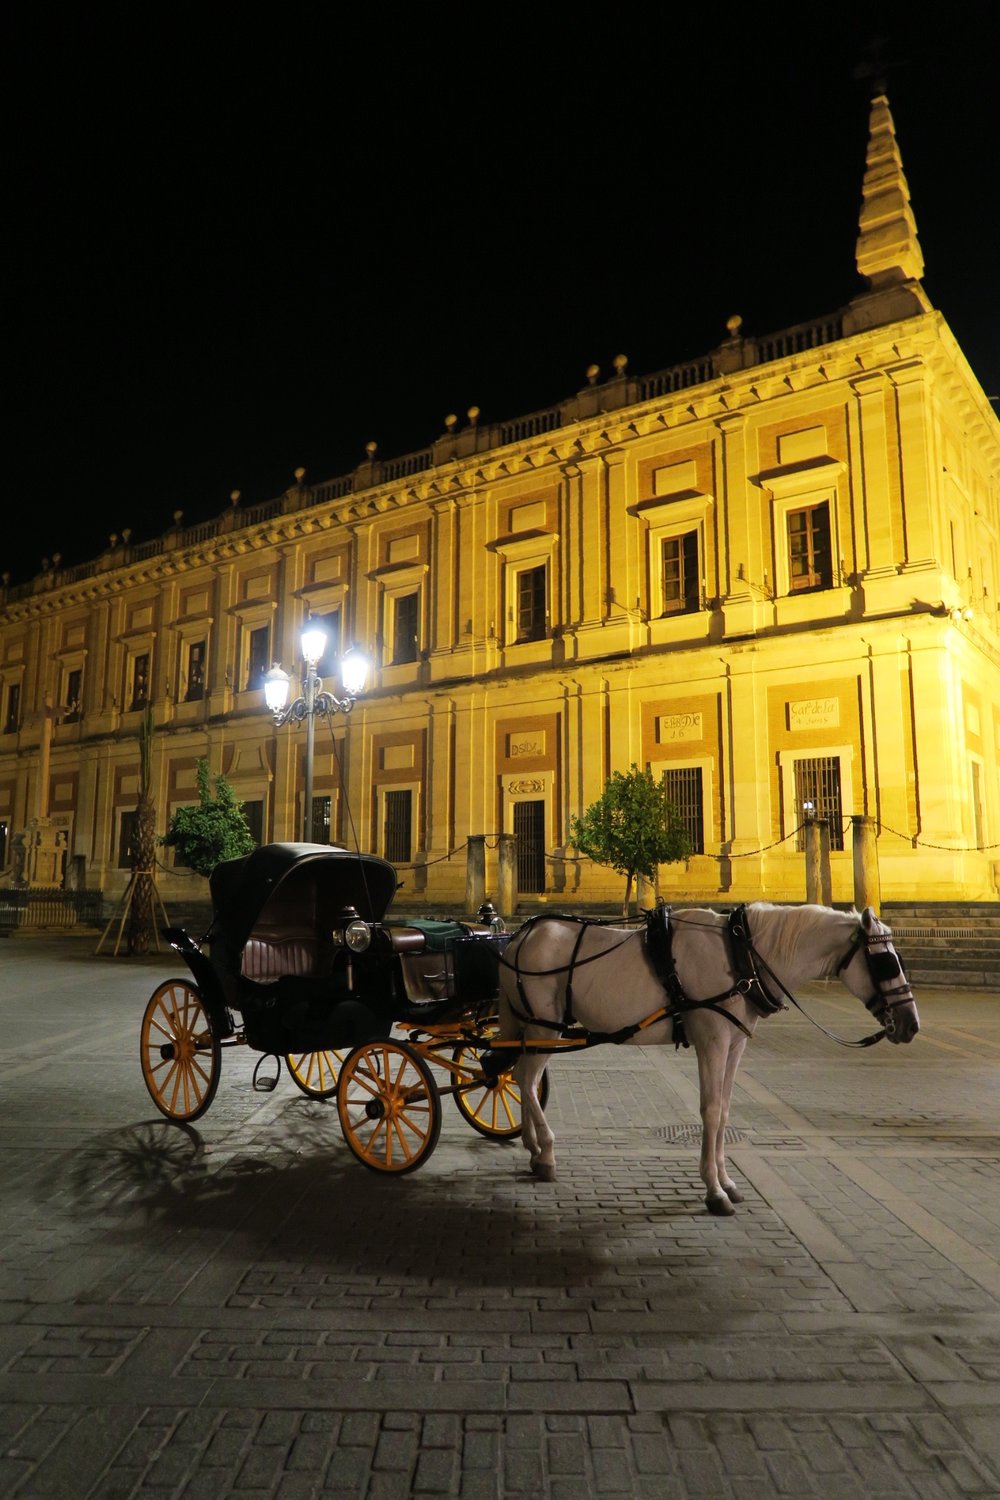 Sevilla horse and carriage from Sincerely Yours Susie Seville blog post. Photo credit Susie Cormack Bruce.JPG